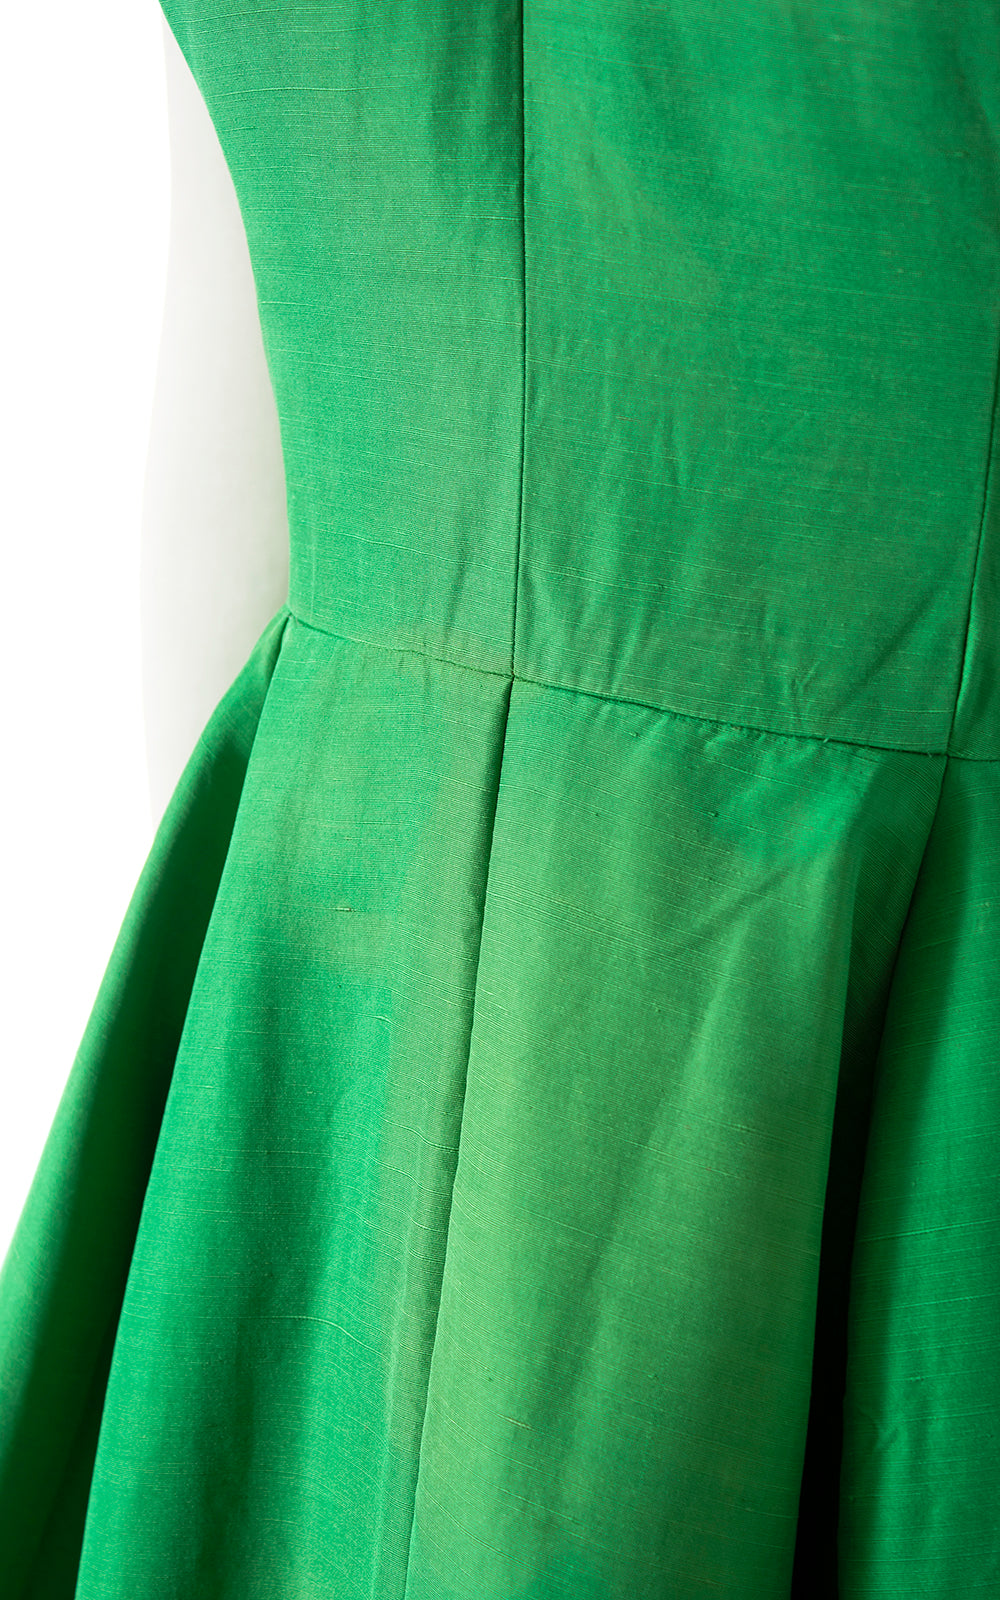 Vintage 1950s 1960s Raw Silk Kelly Green Fit and Flare Formal Evening Party Dress Birthday Life Vintage